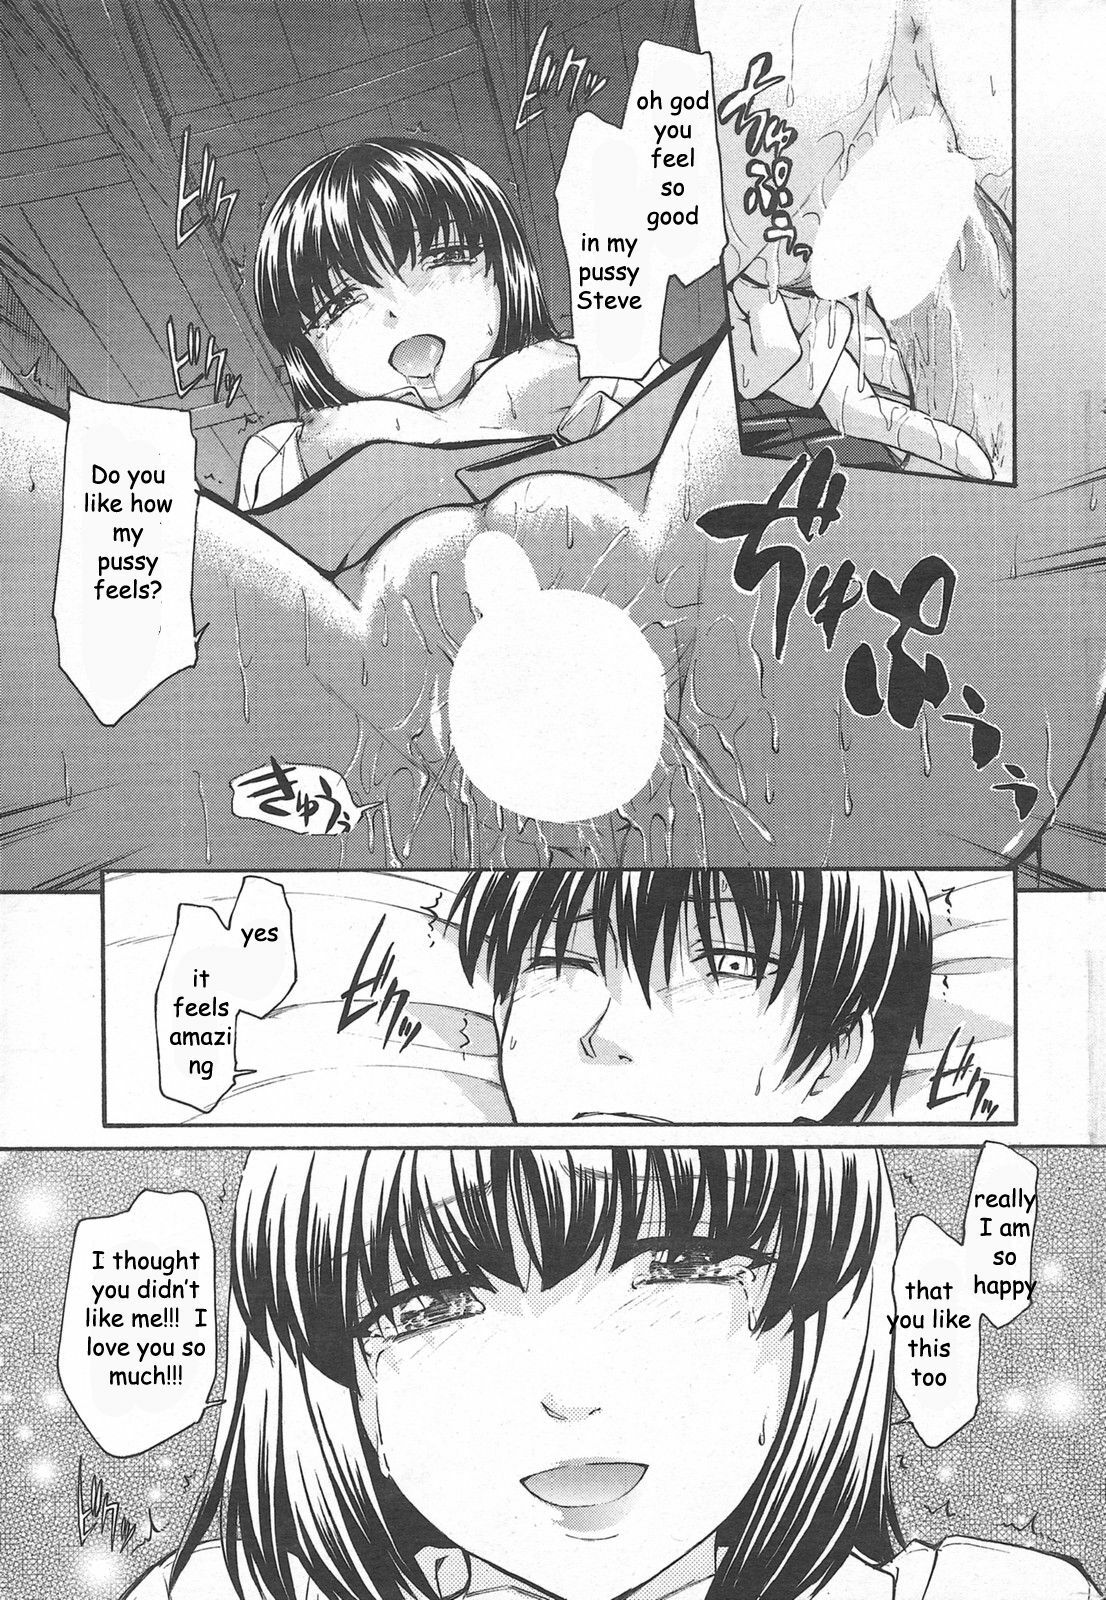 Reluctant Brother [English] [Rewrite] [EZ Rewriter] page 15 full